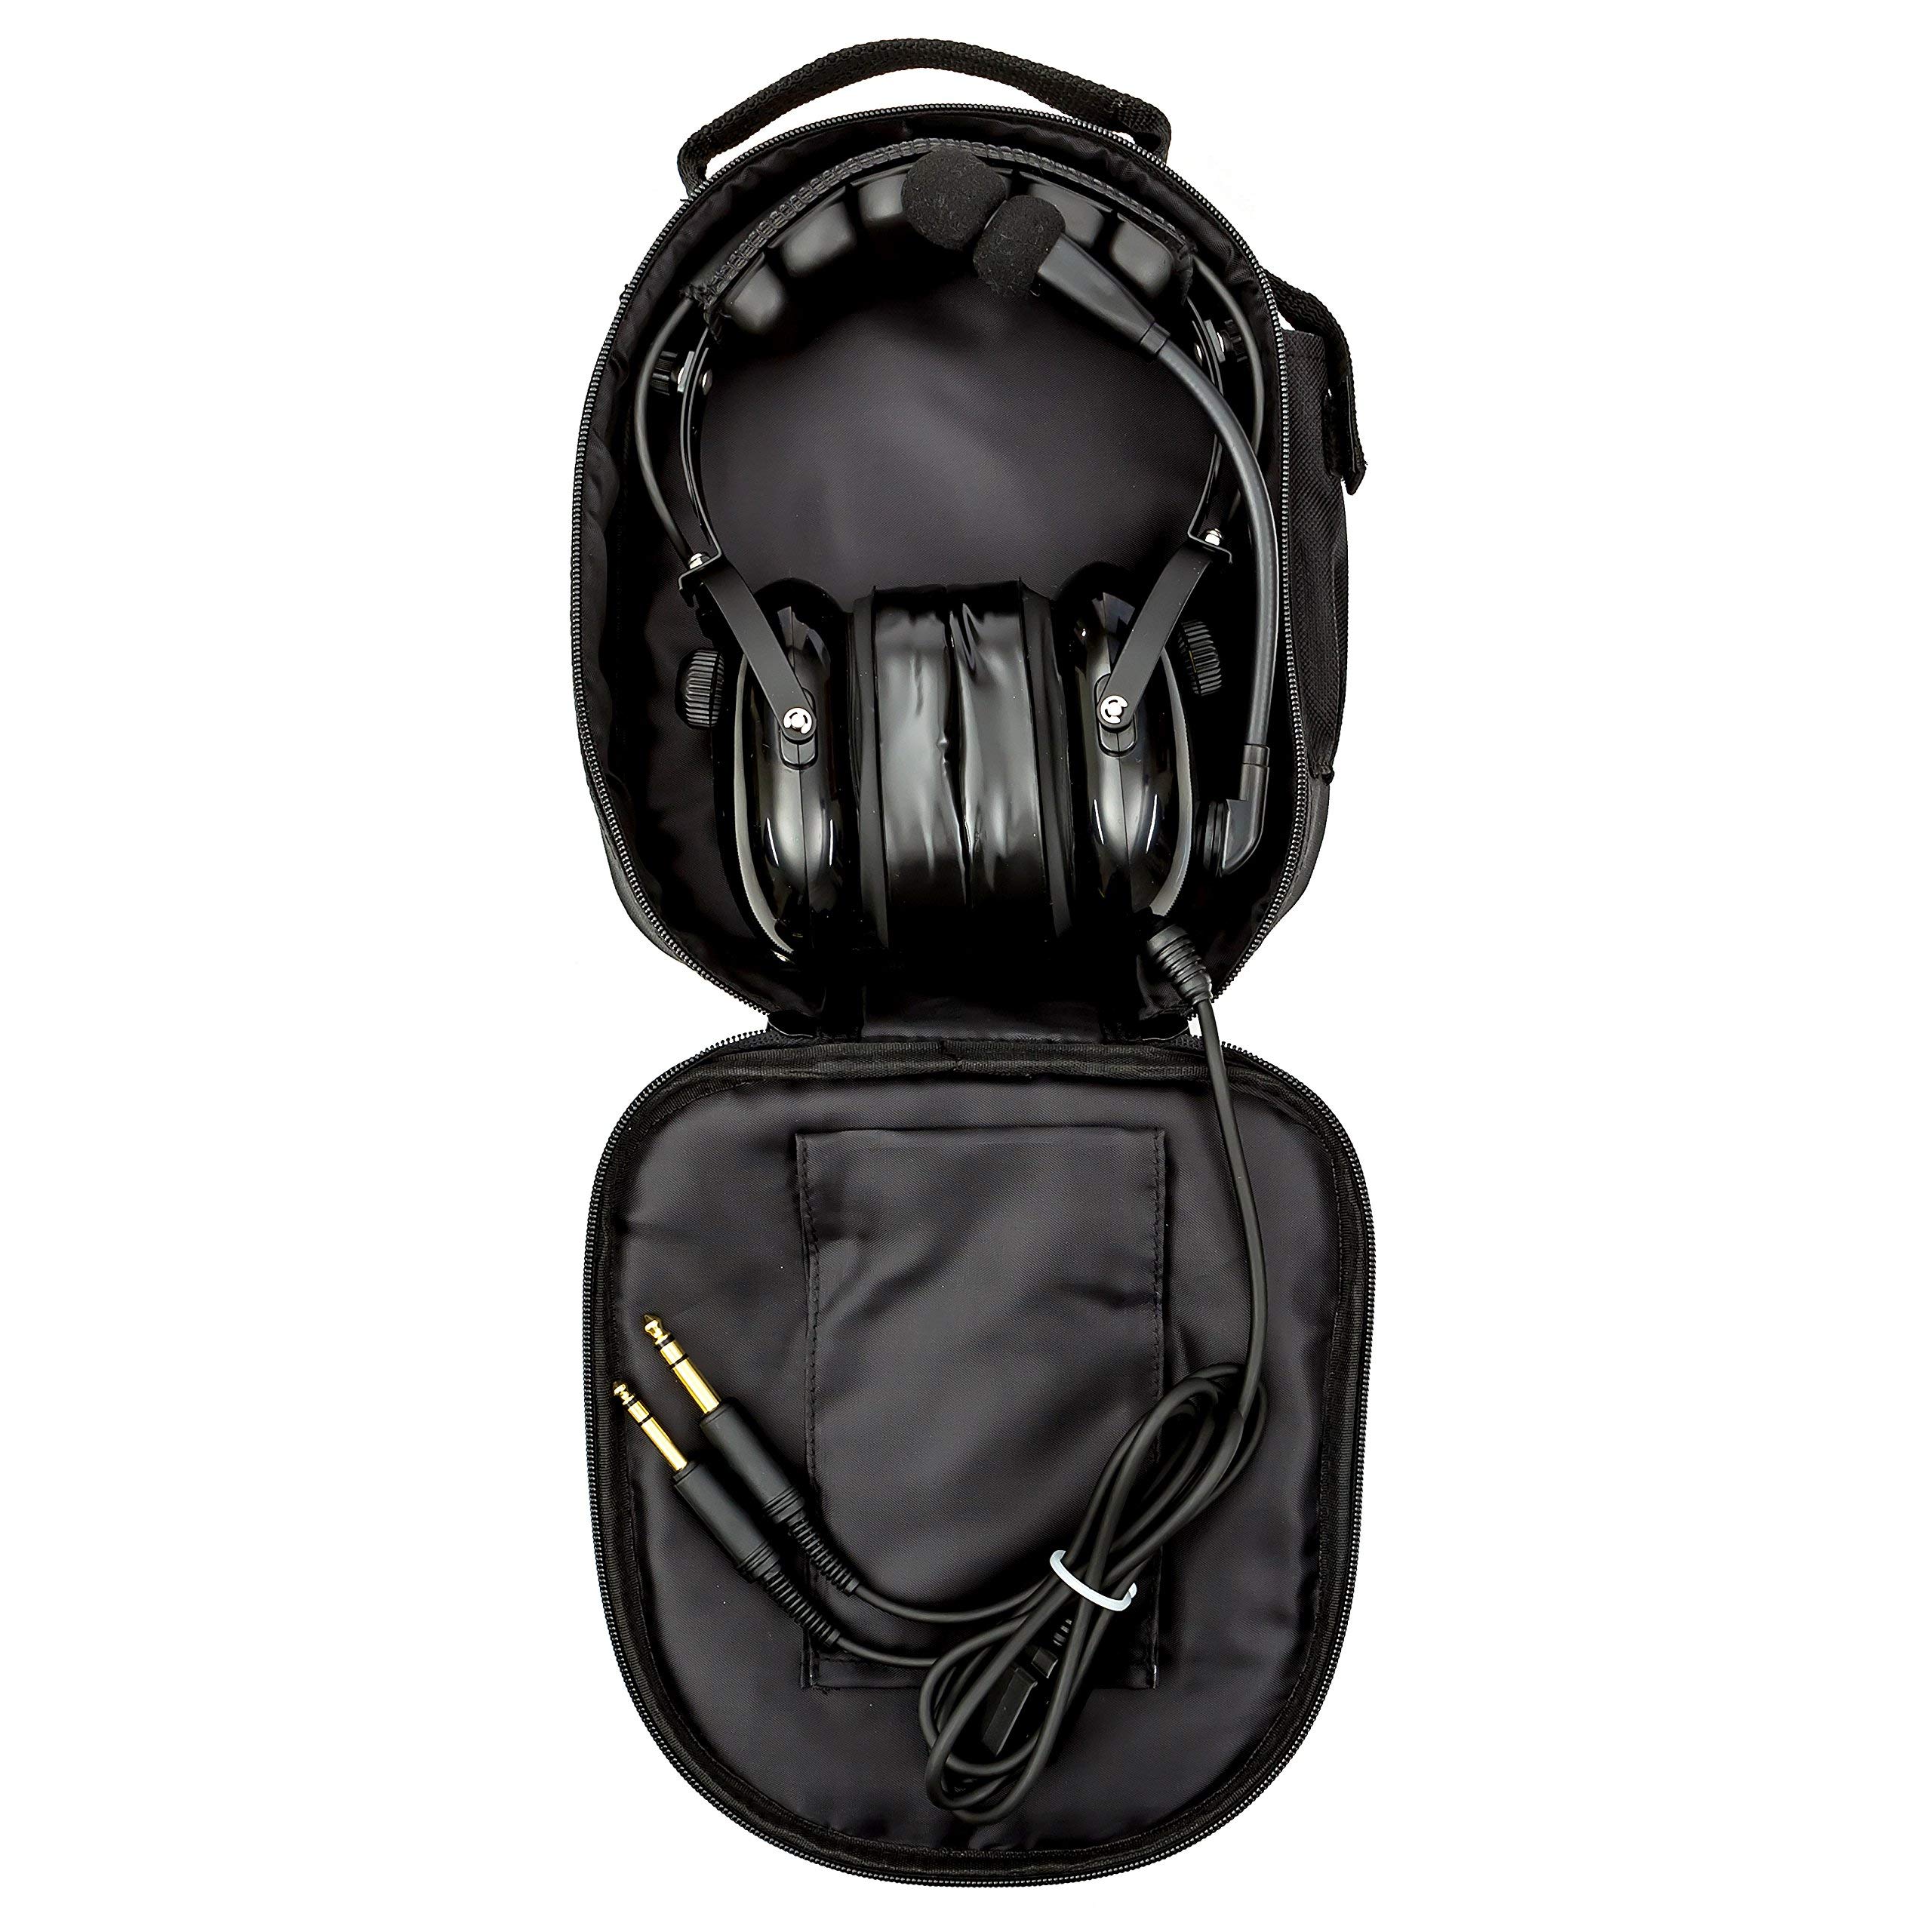 KORE AVIATION KA-1 Premium Gel Ear Seal PNR Pilot Aviation Headset with MP3 Support, Carrying Case, Cloth Ear Covers Included